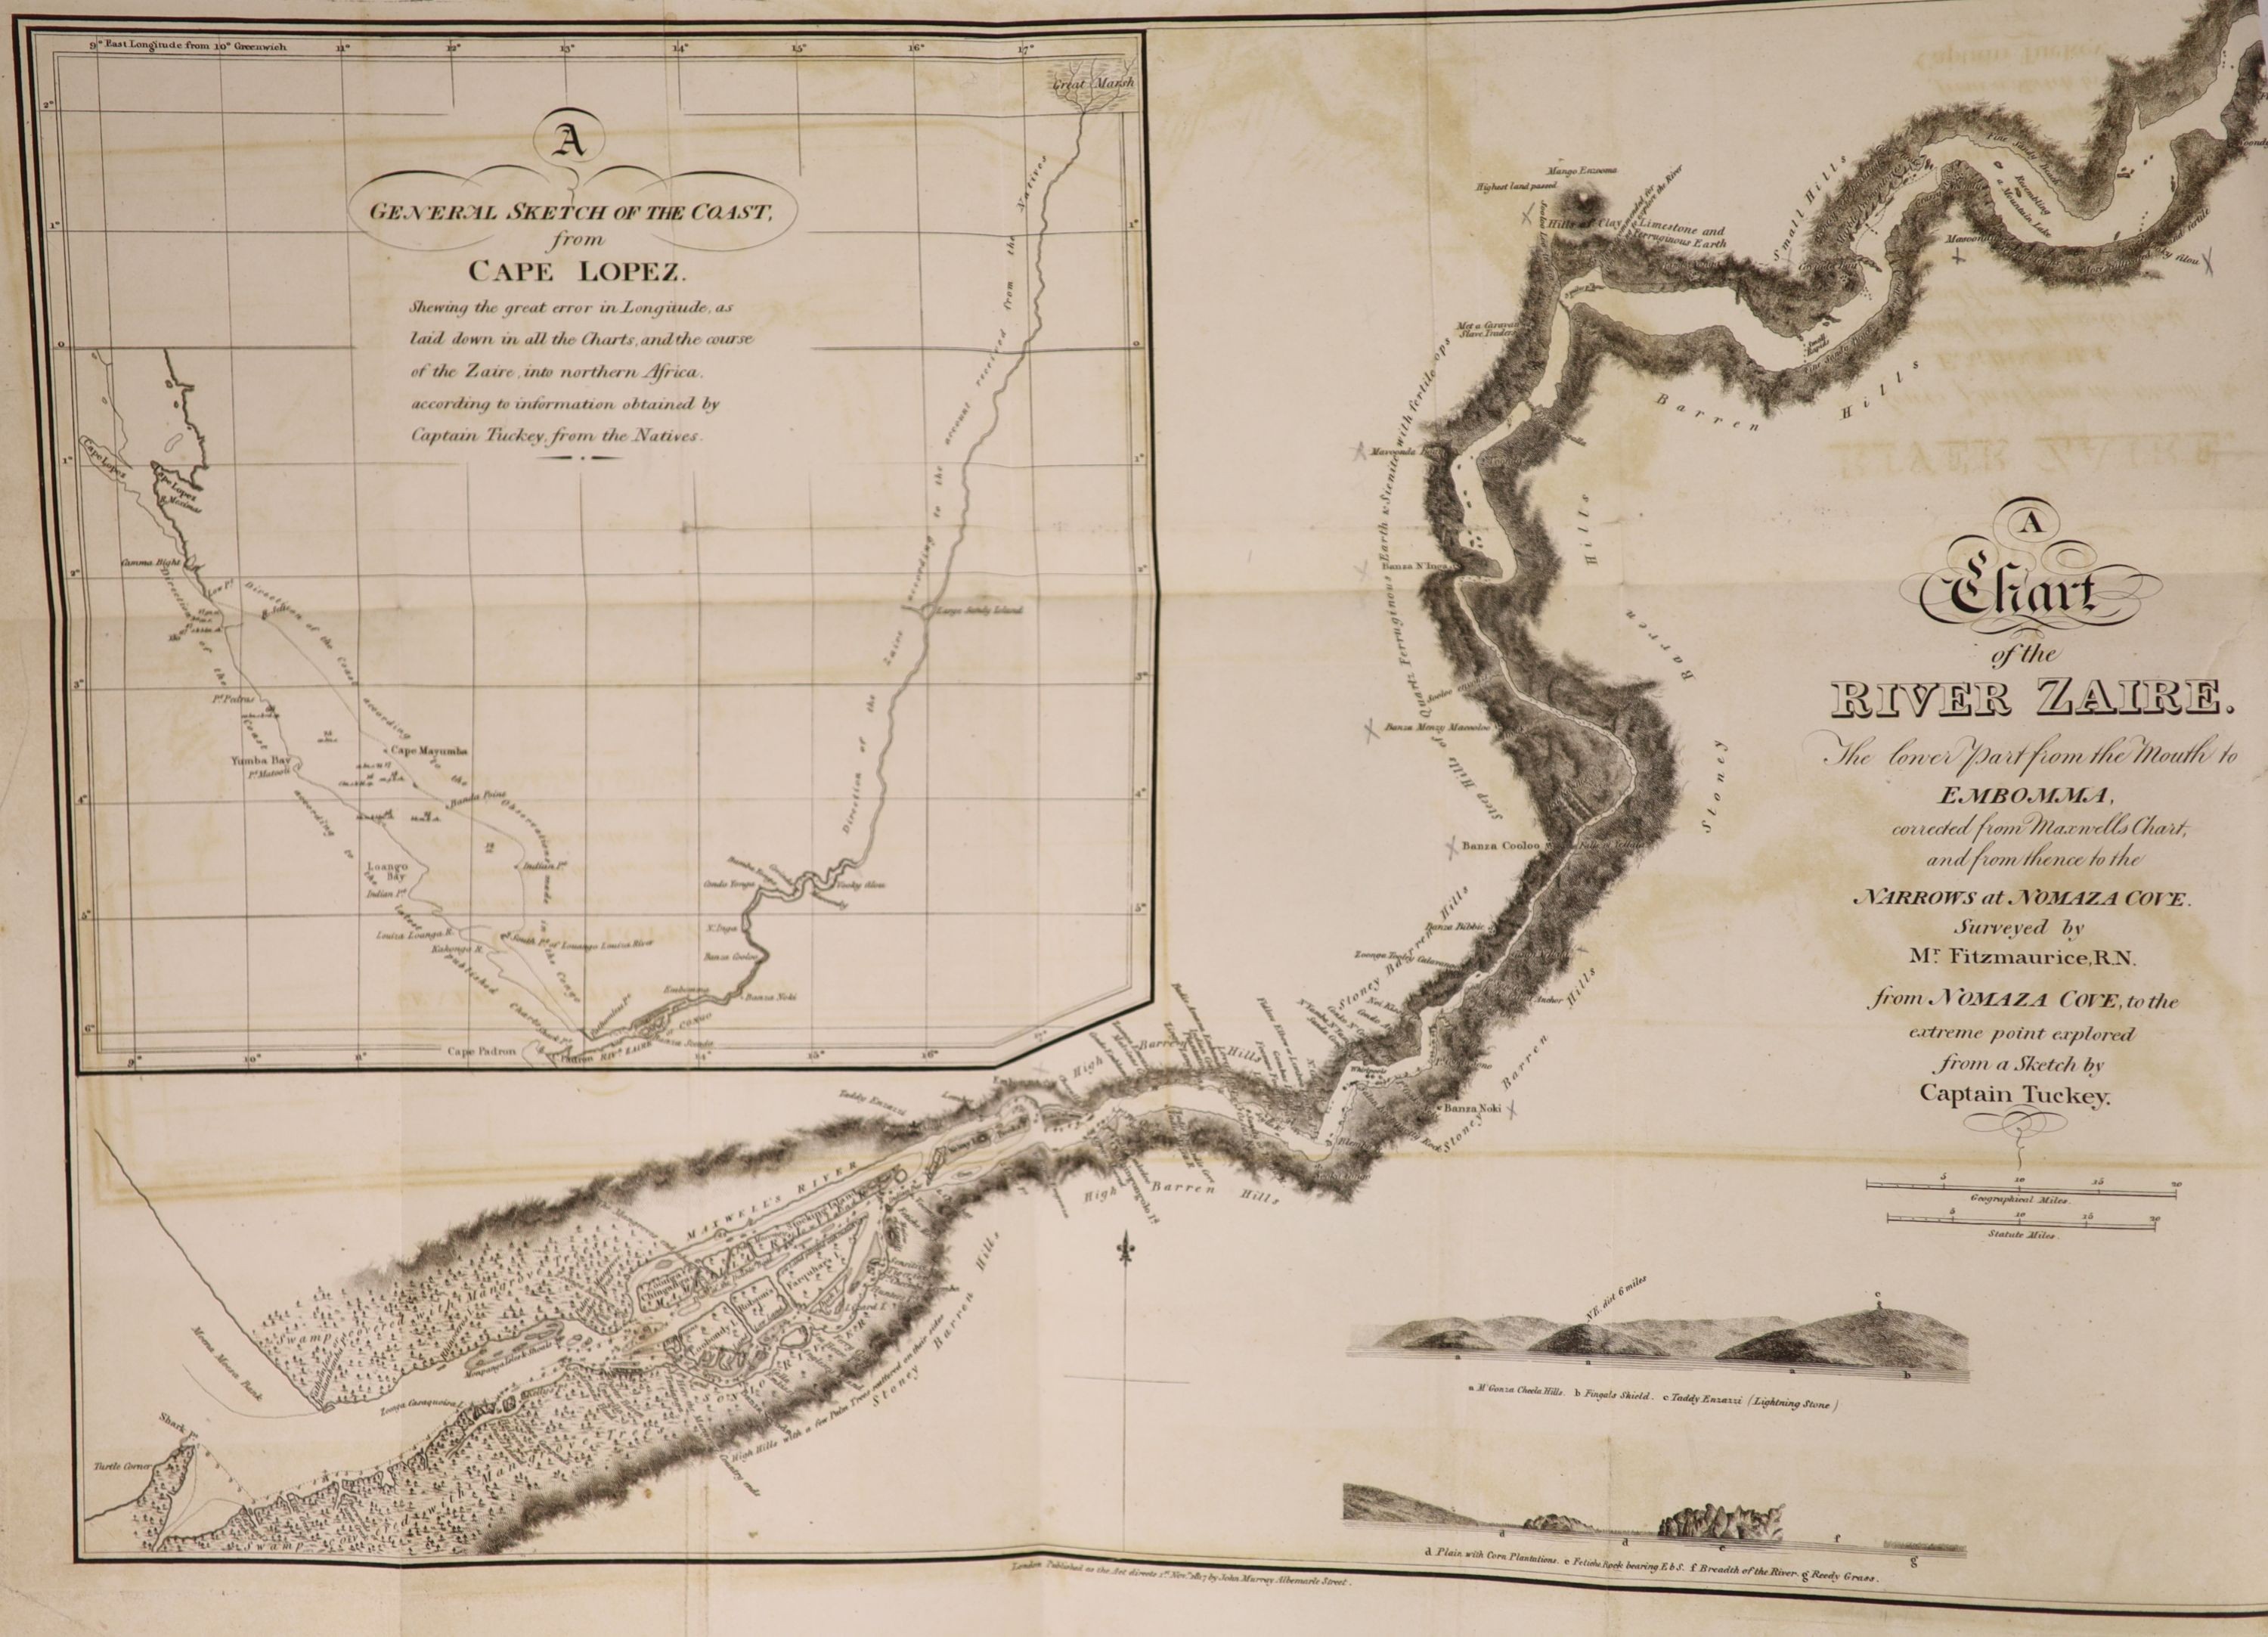 Tuckey, Capt.J.K. - Narrative of an Expedition to Explore the River Zaire, usually called the Congo, in South Africa, in 1816 ... folded map, 13 engraved plates and text illus.